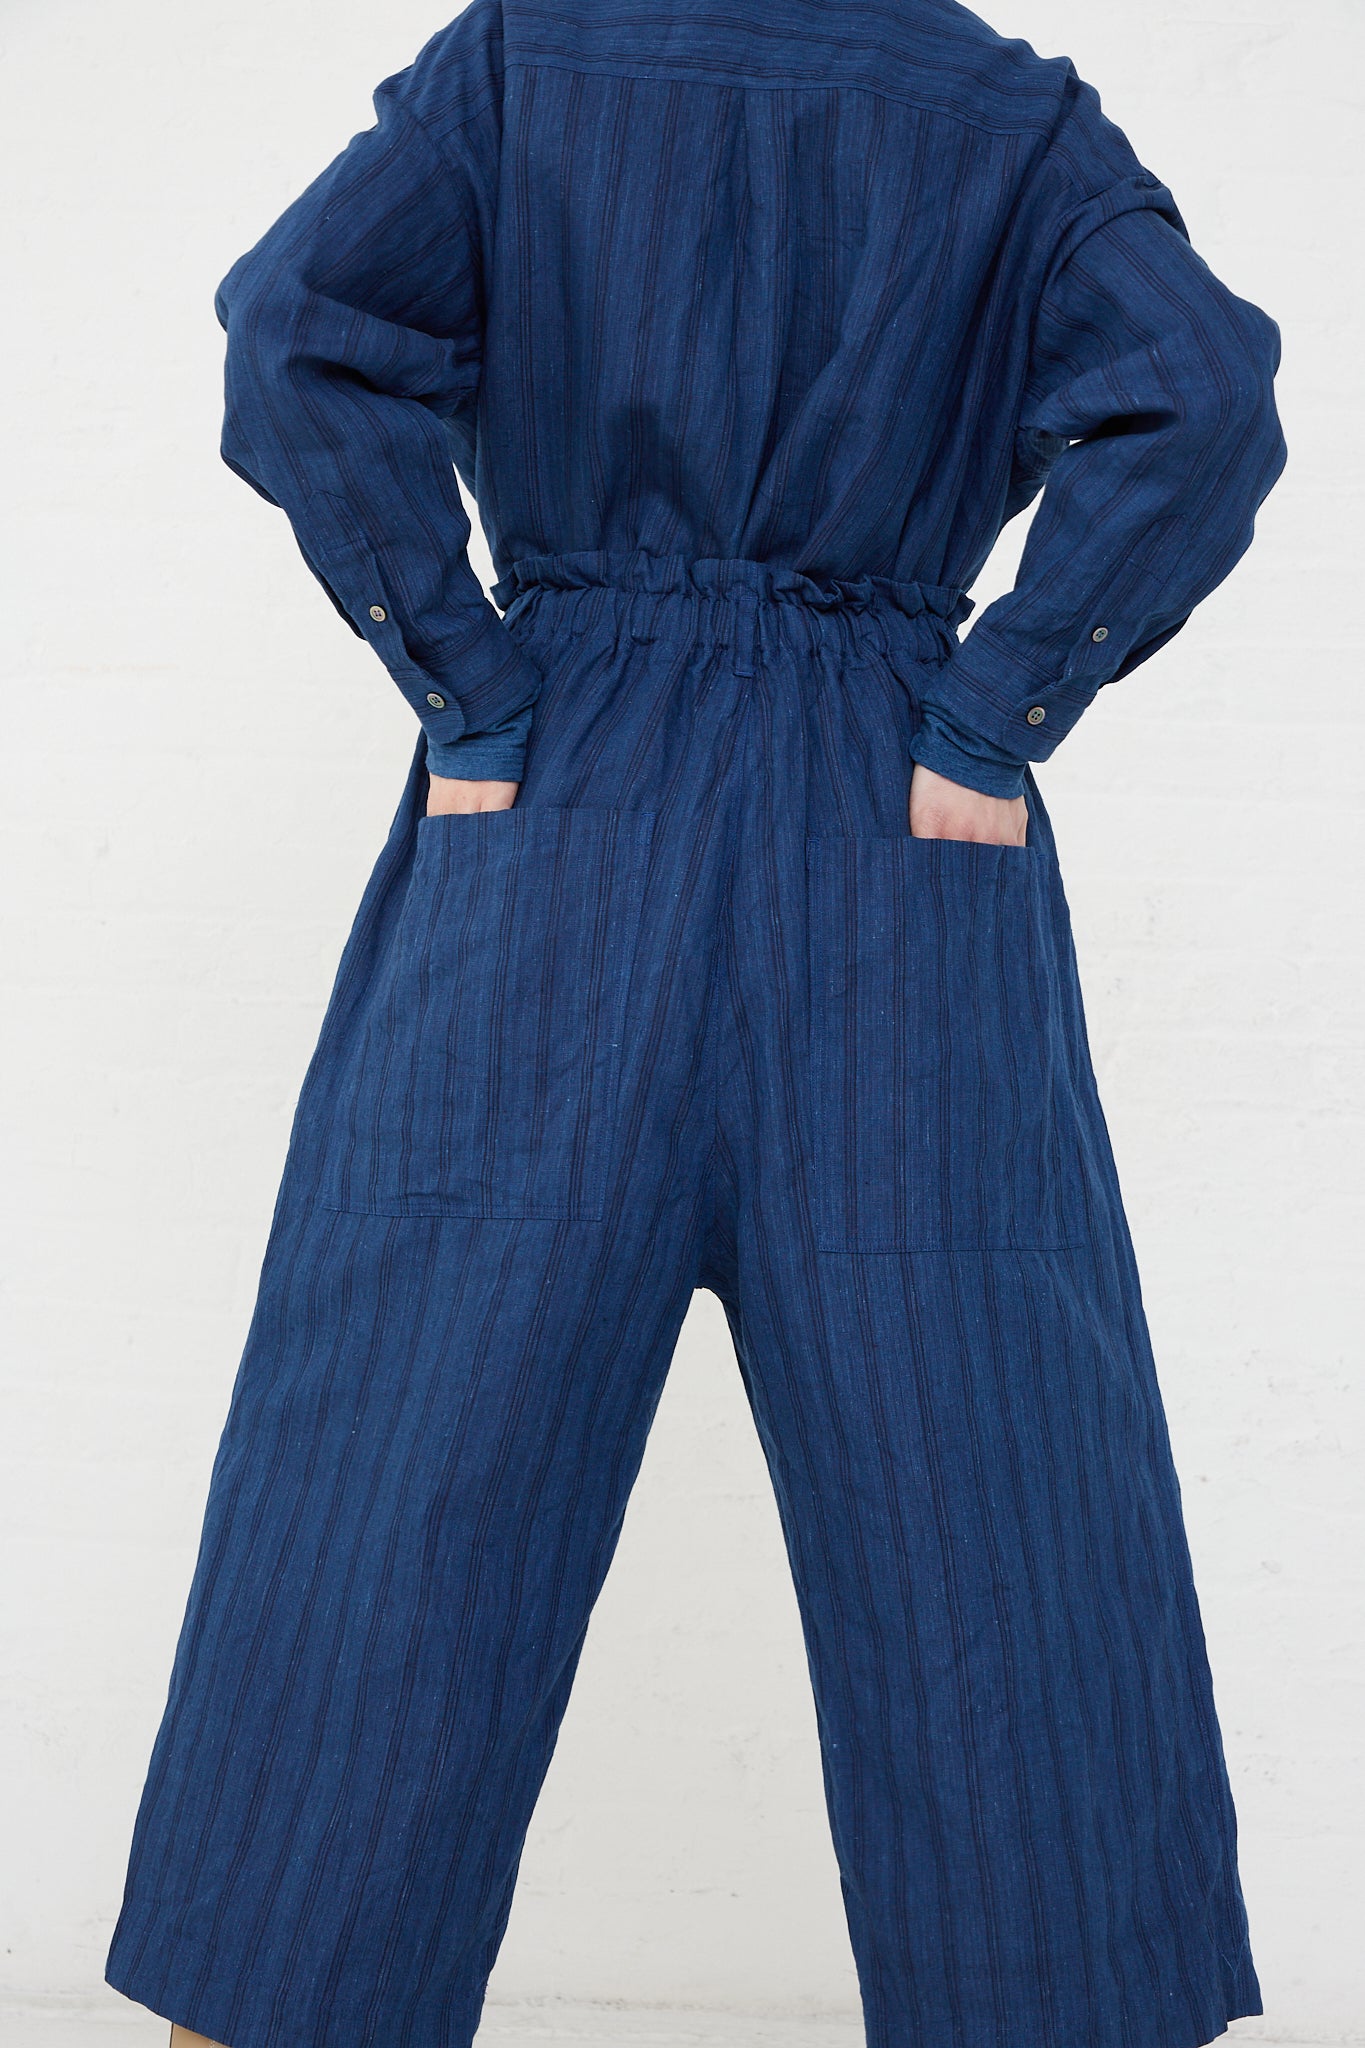 The back view of a woman in a Ichi Antiquités Indigo Stripes woven linen jumpsuit, featuring an elasticated waist and wide leg pant.